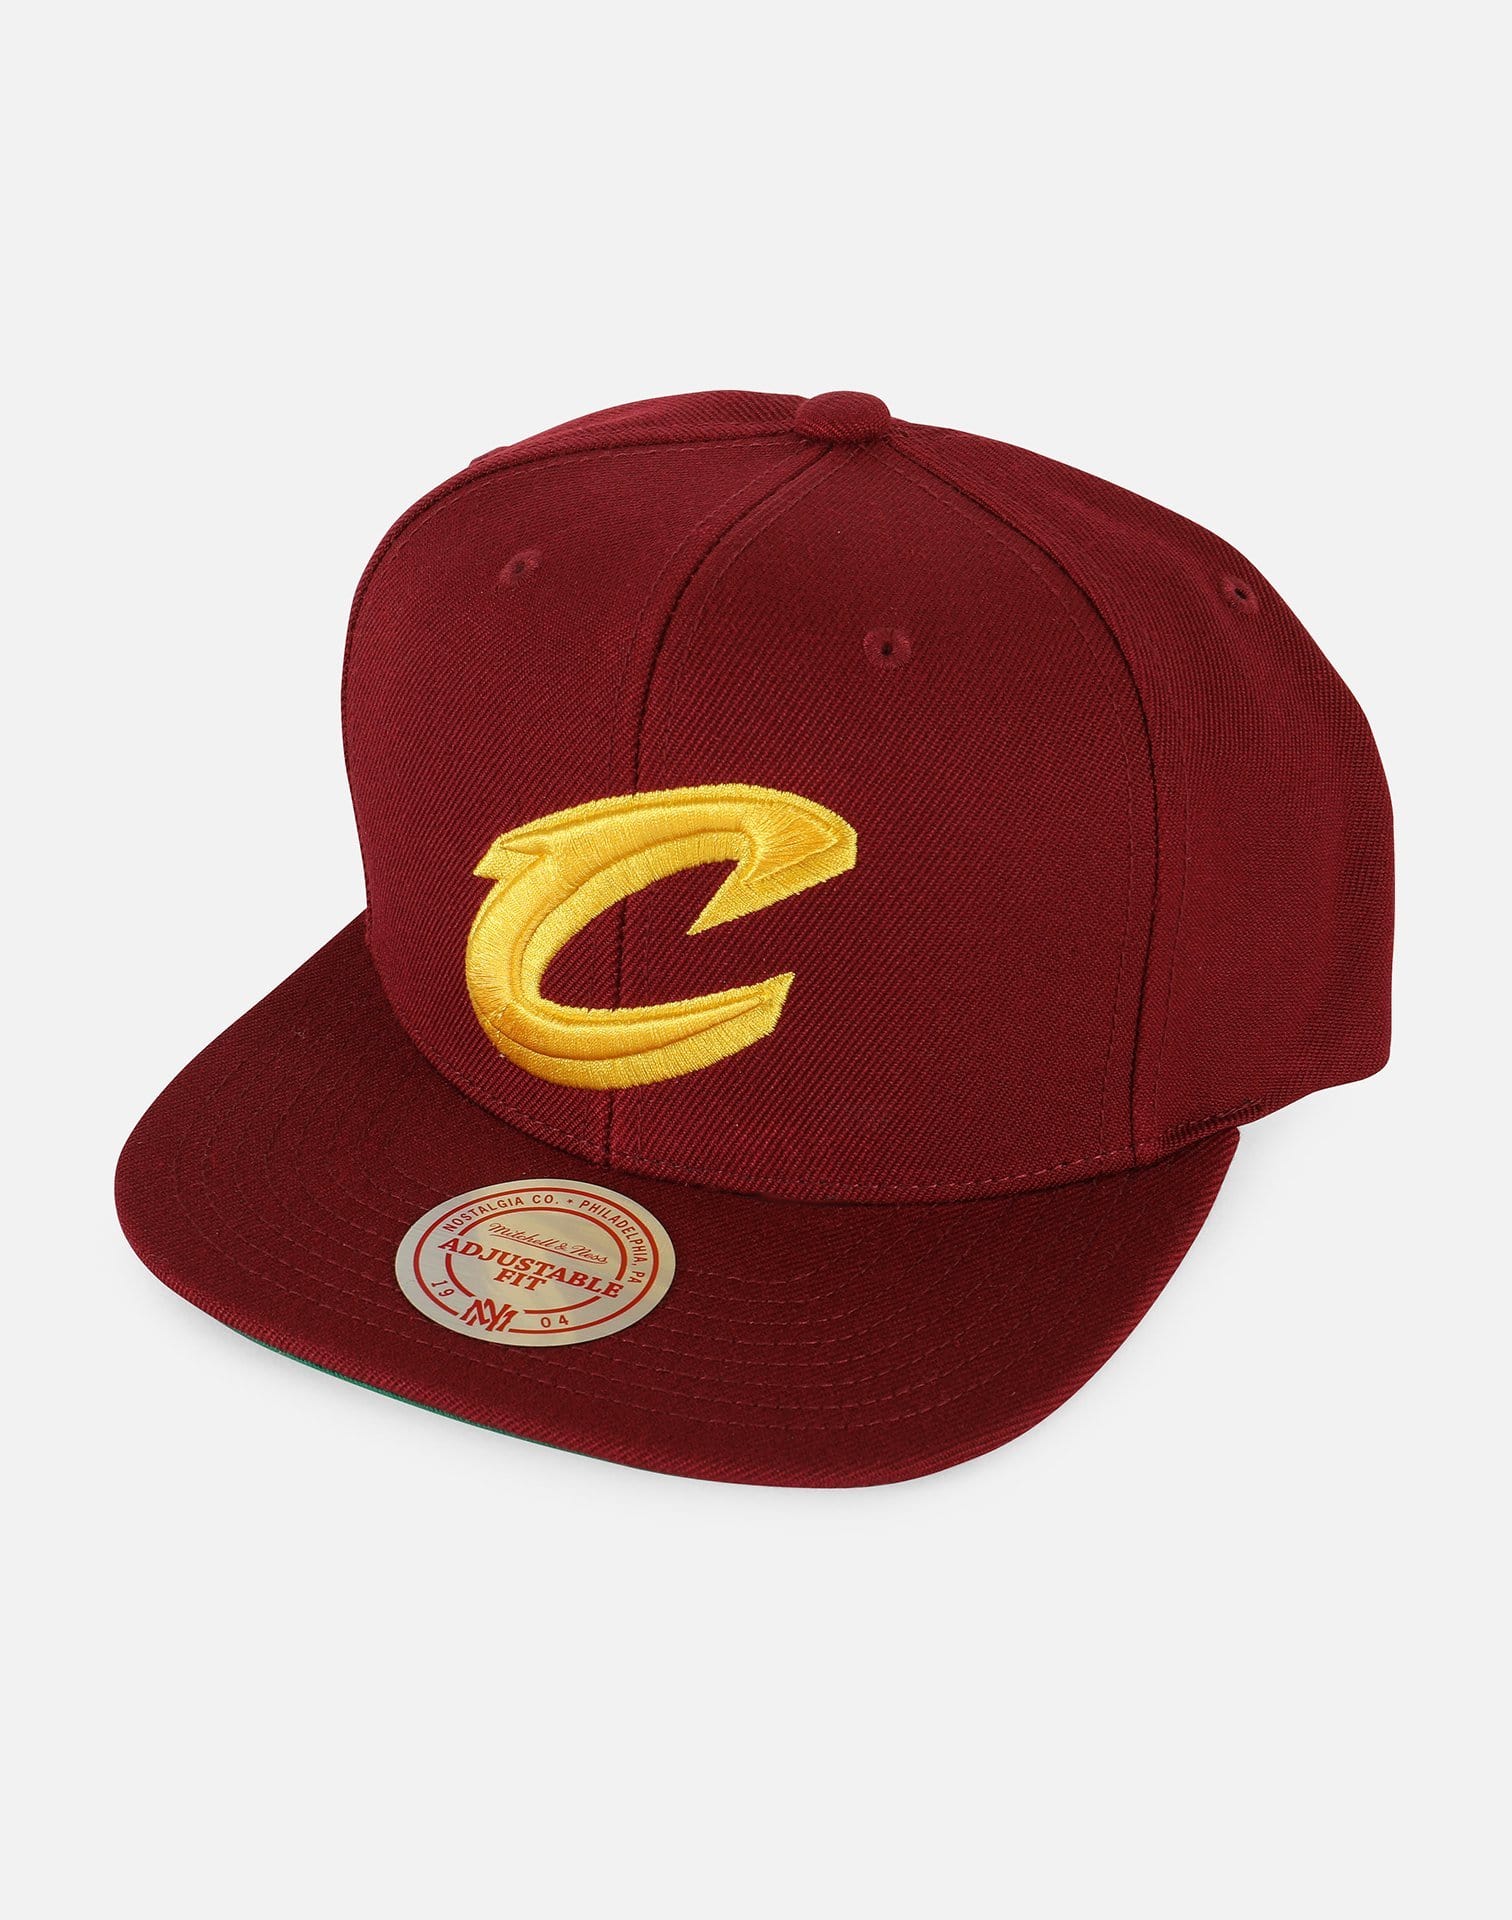 Mitchell & Ness Men's Cleveland Cavaliers Red Snapback Hat